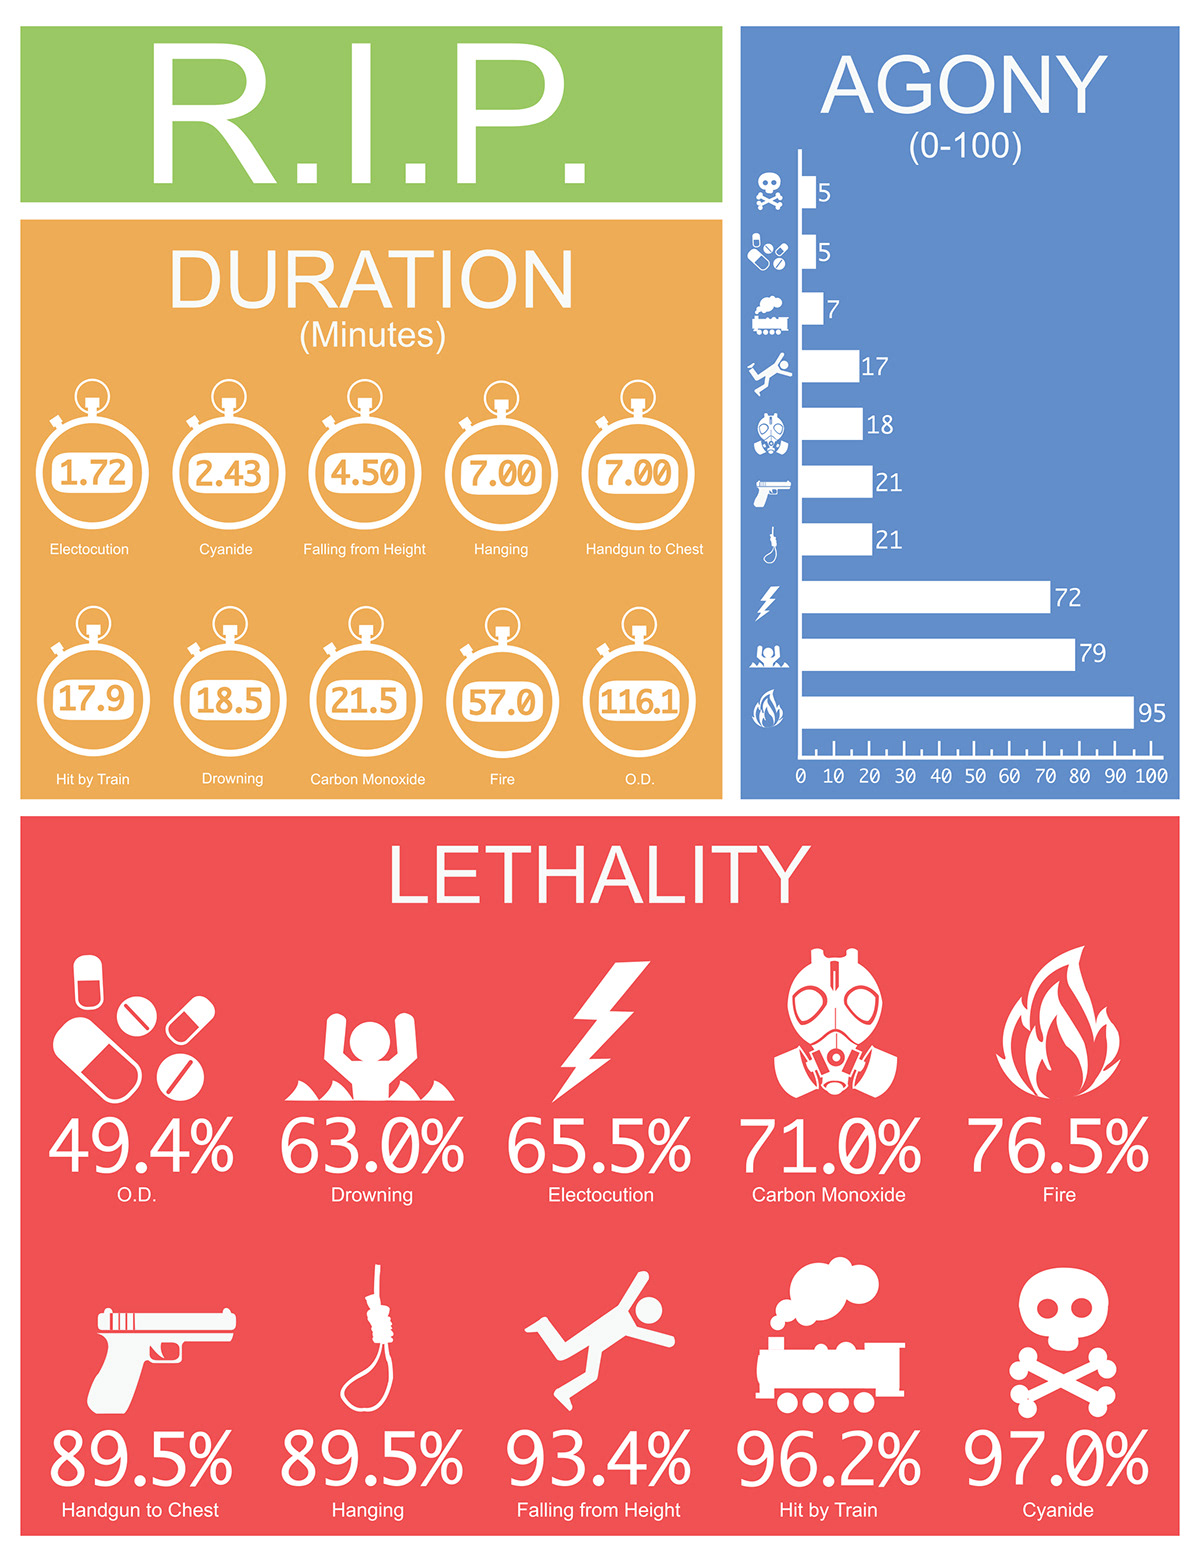 death info infographic Lethality agony